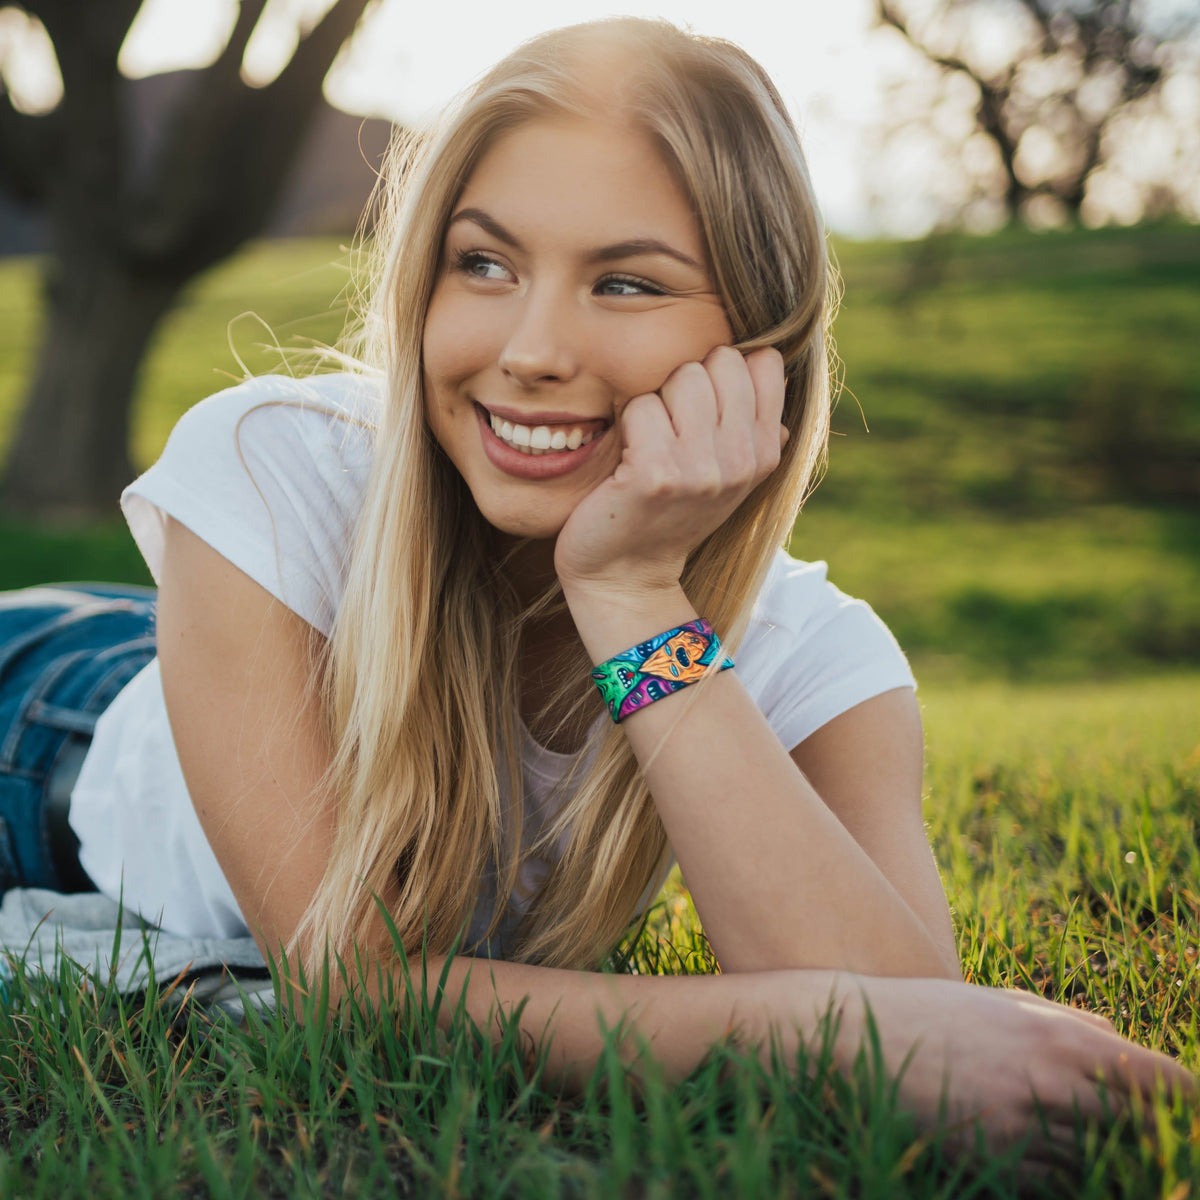 Lifestyle image of a Stay Weird on wrist of smiling model